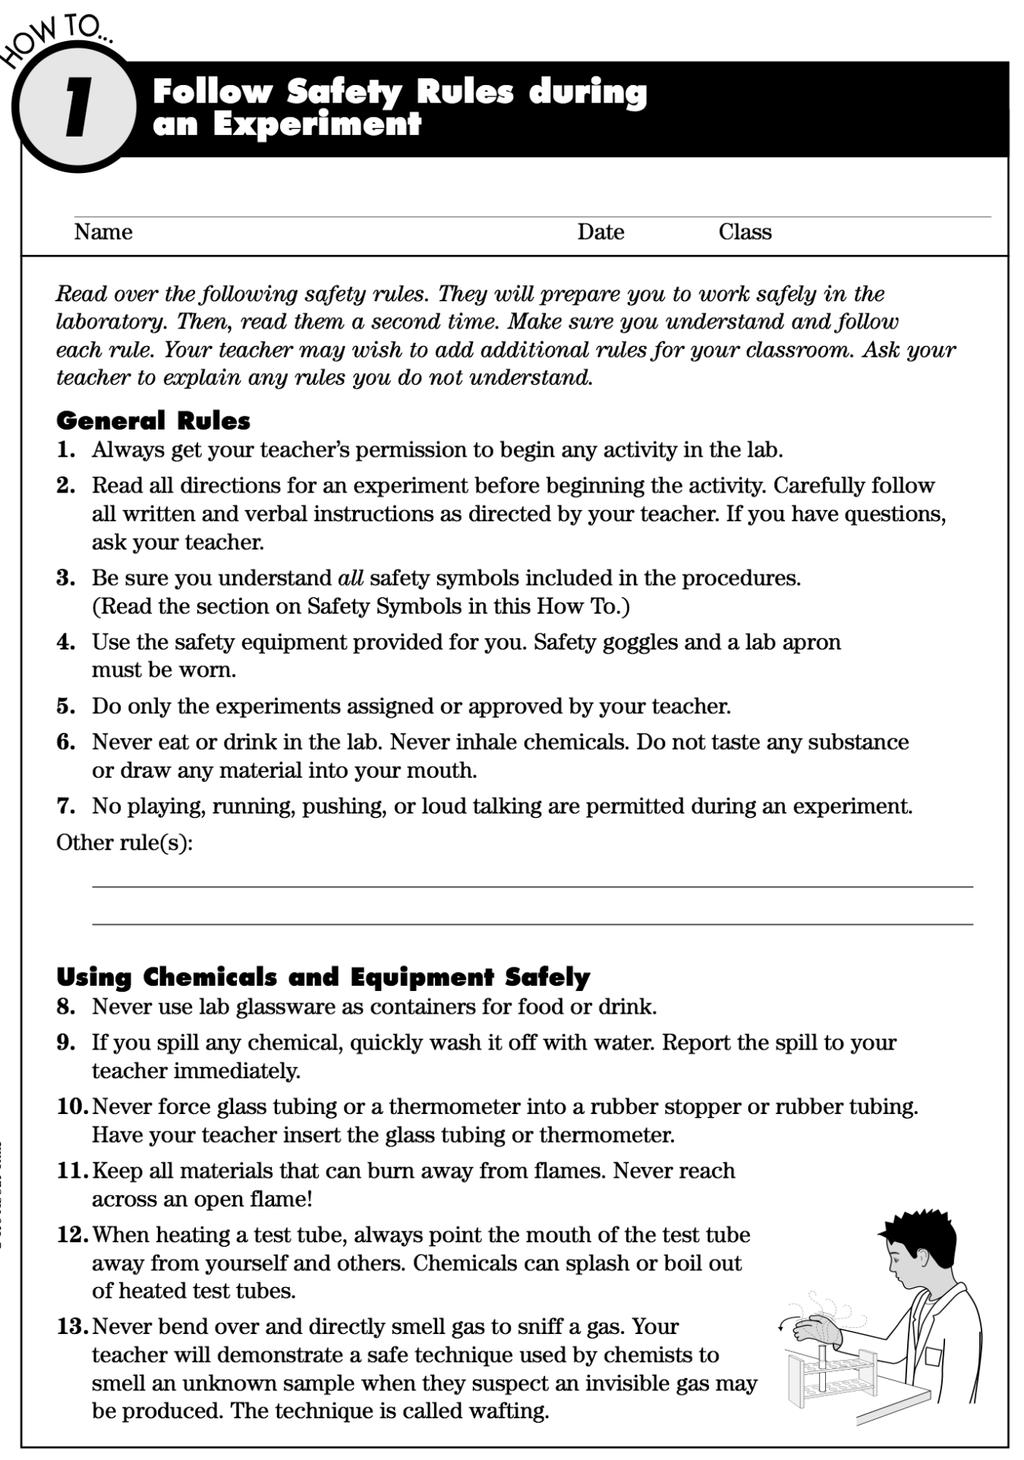 STUDENT I, (Student s name) have read and agree to follow all of the safety rules set forth in this contract.